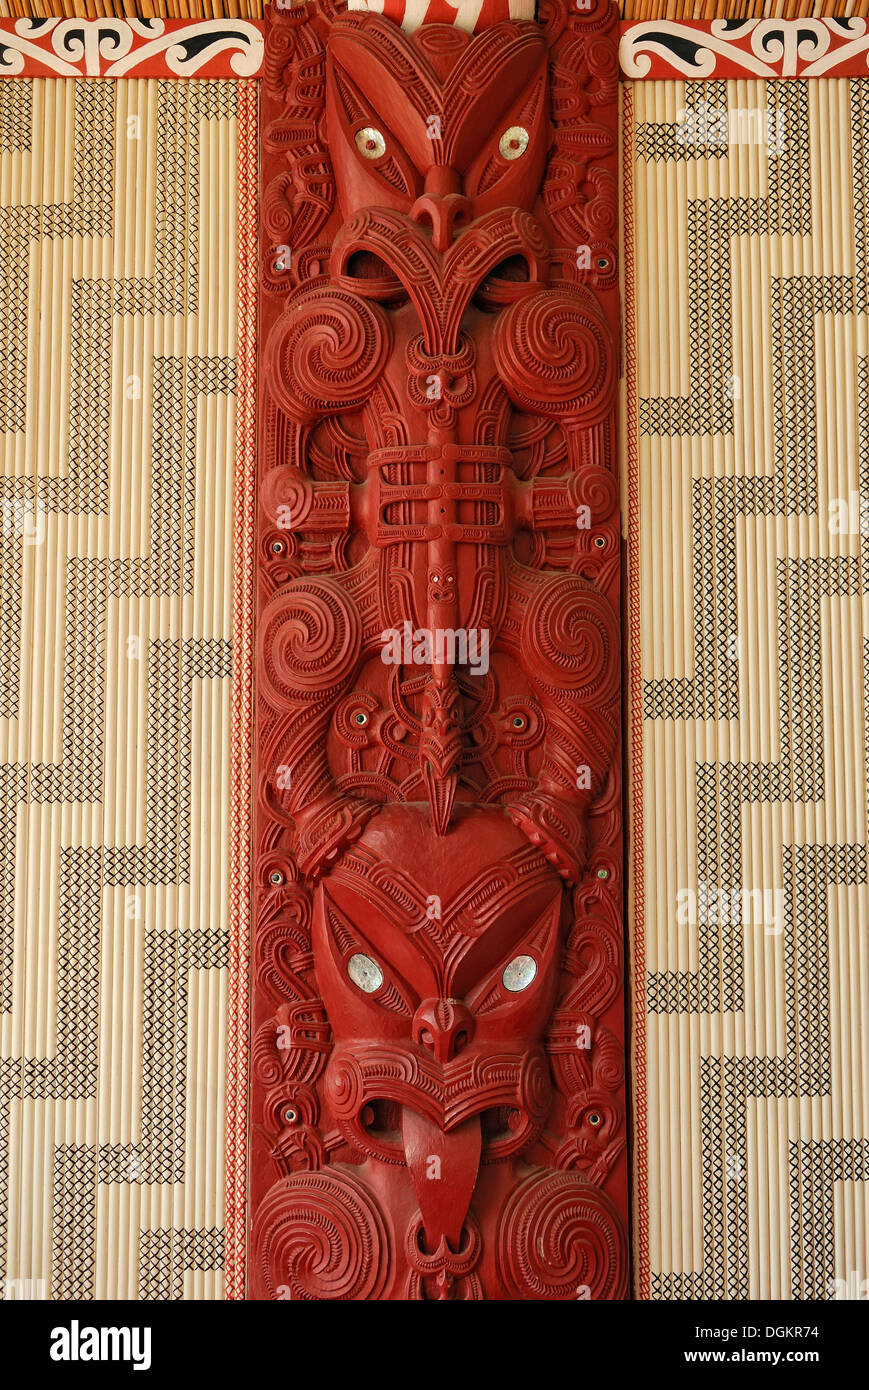 Maori carving, wooden relief with mother of pearl inlays, figural representation and ornaments, Maori Meeting House Stock Photo